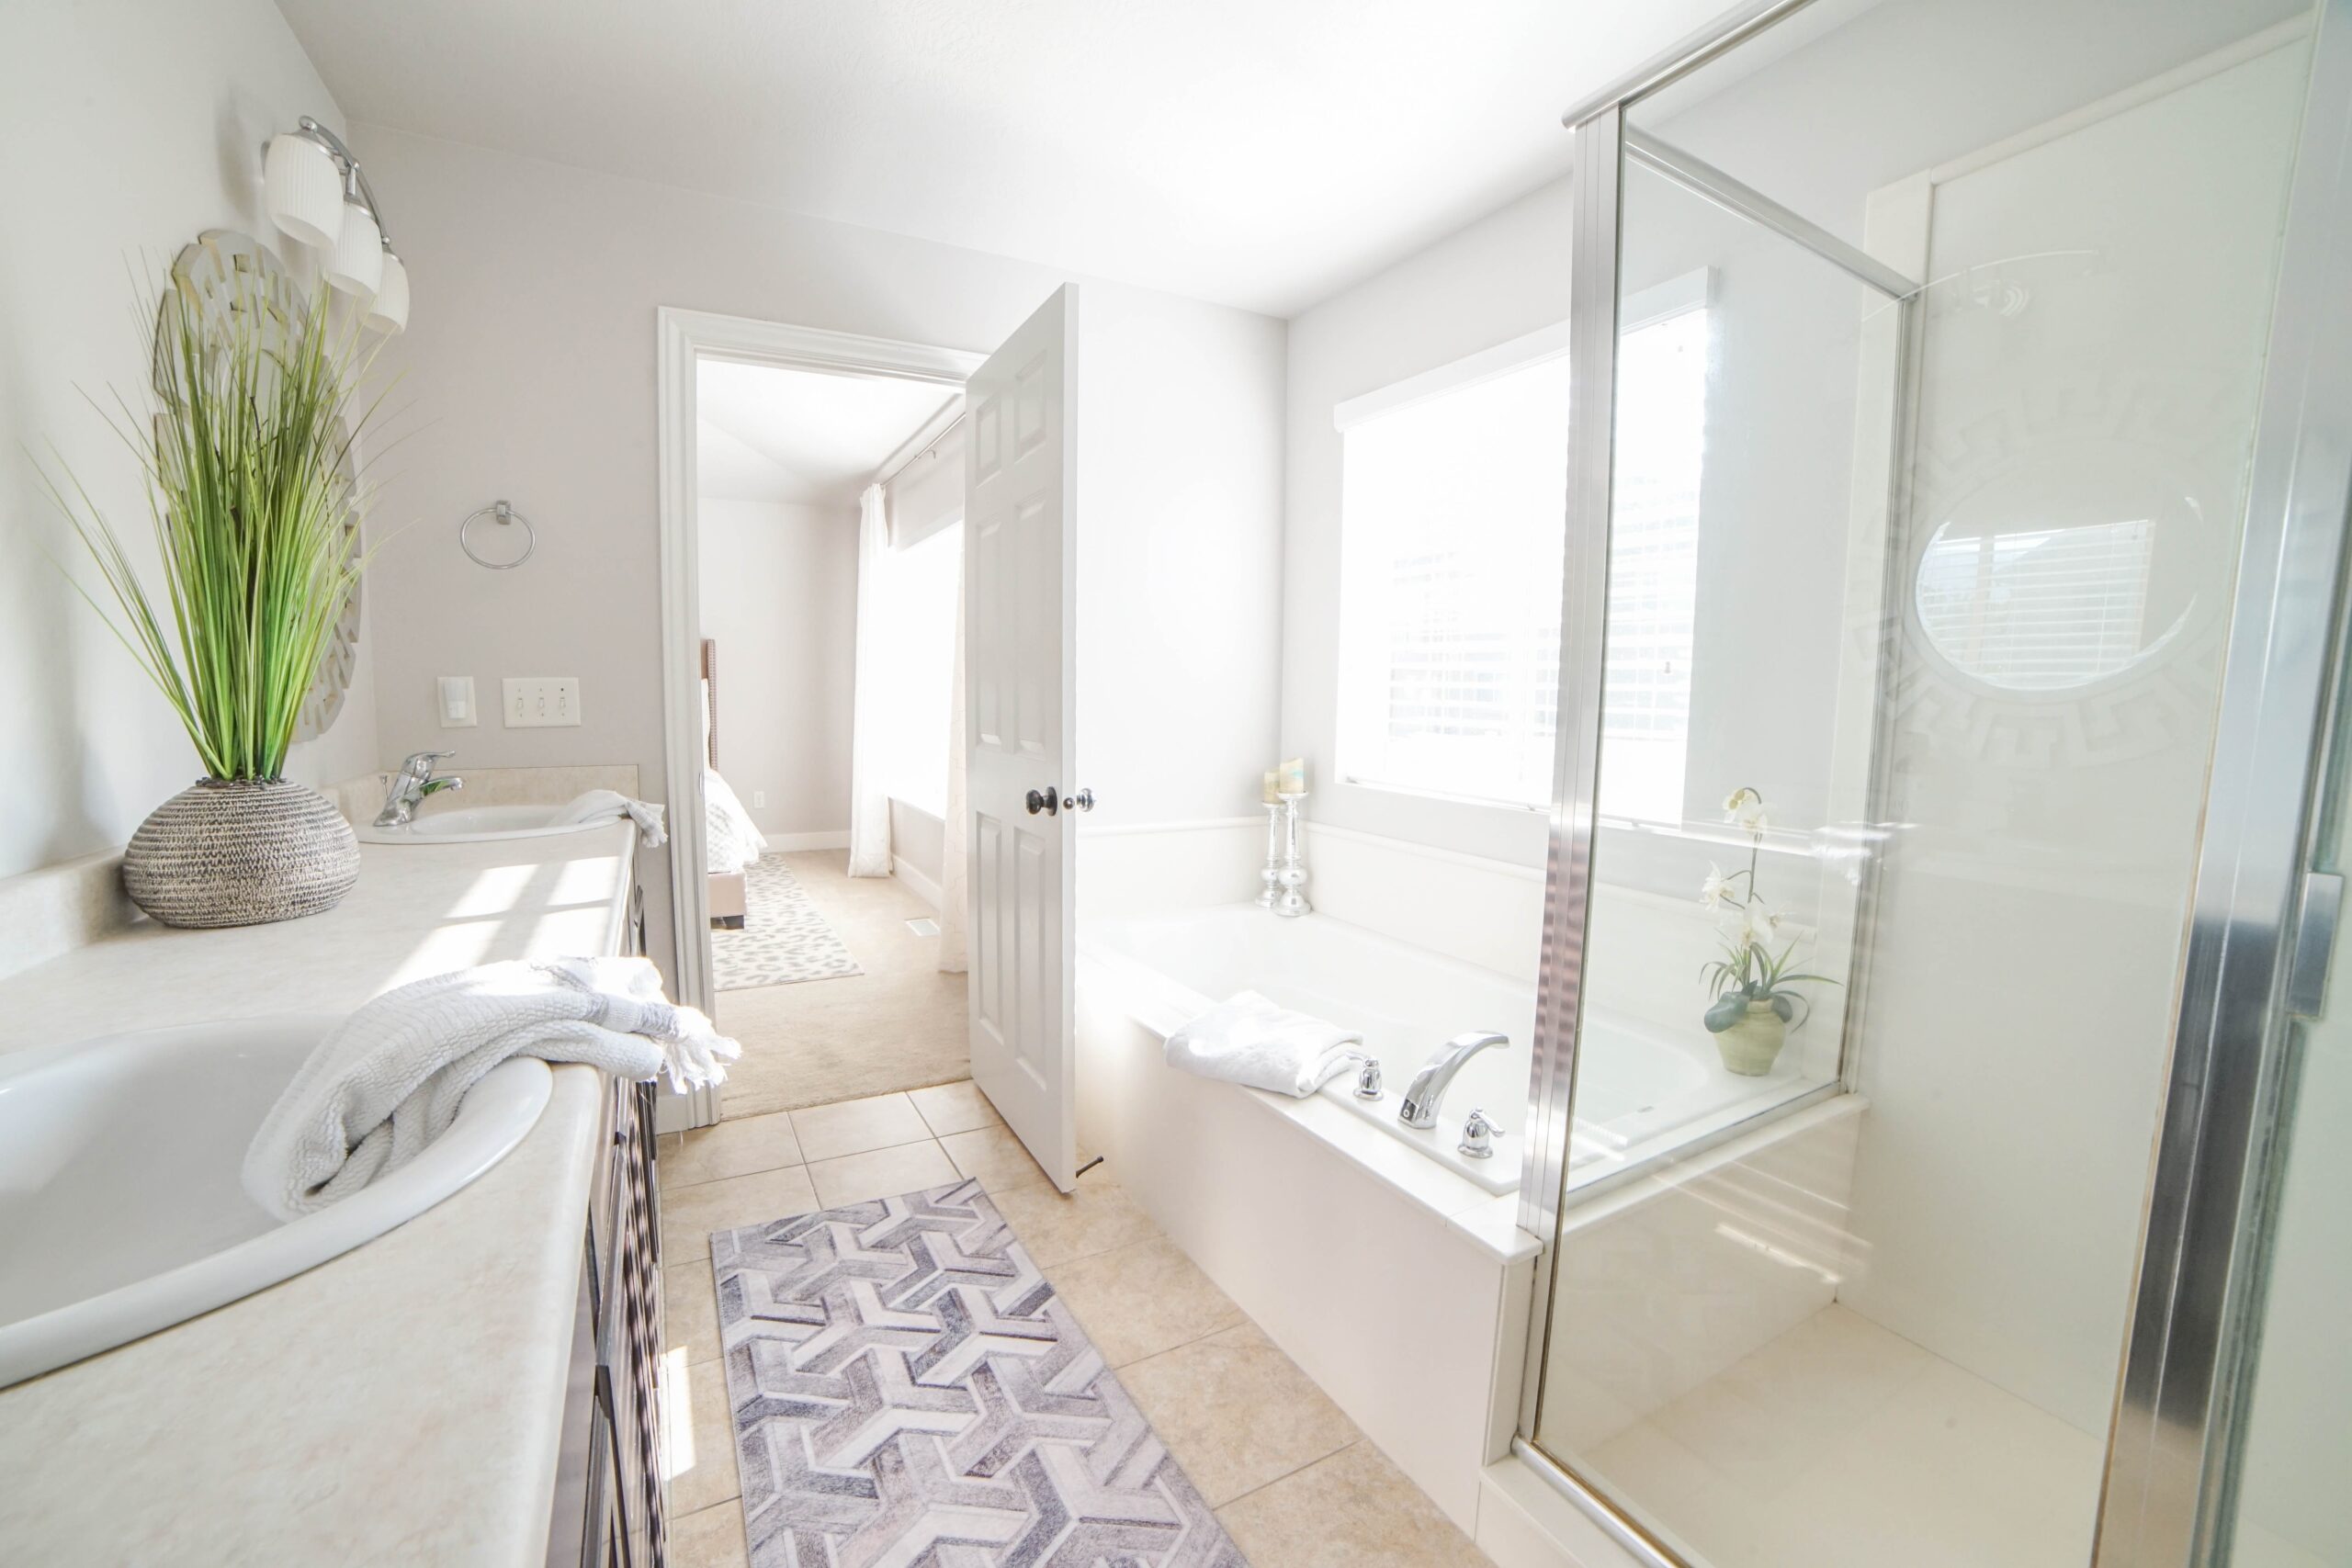 upgraded enclosed shower and large bathtub in bright bathroom